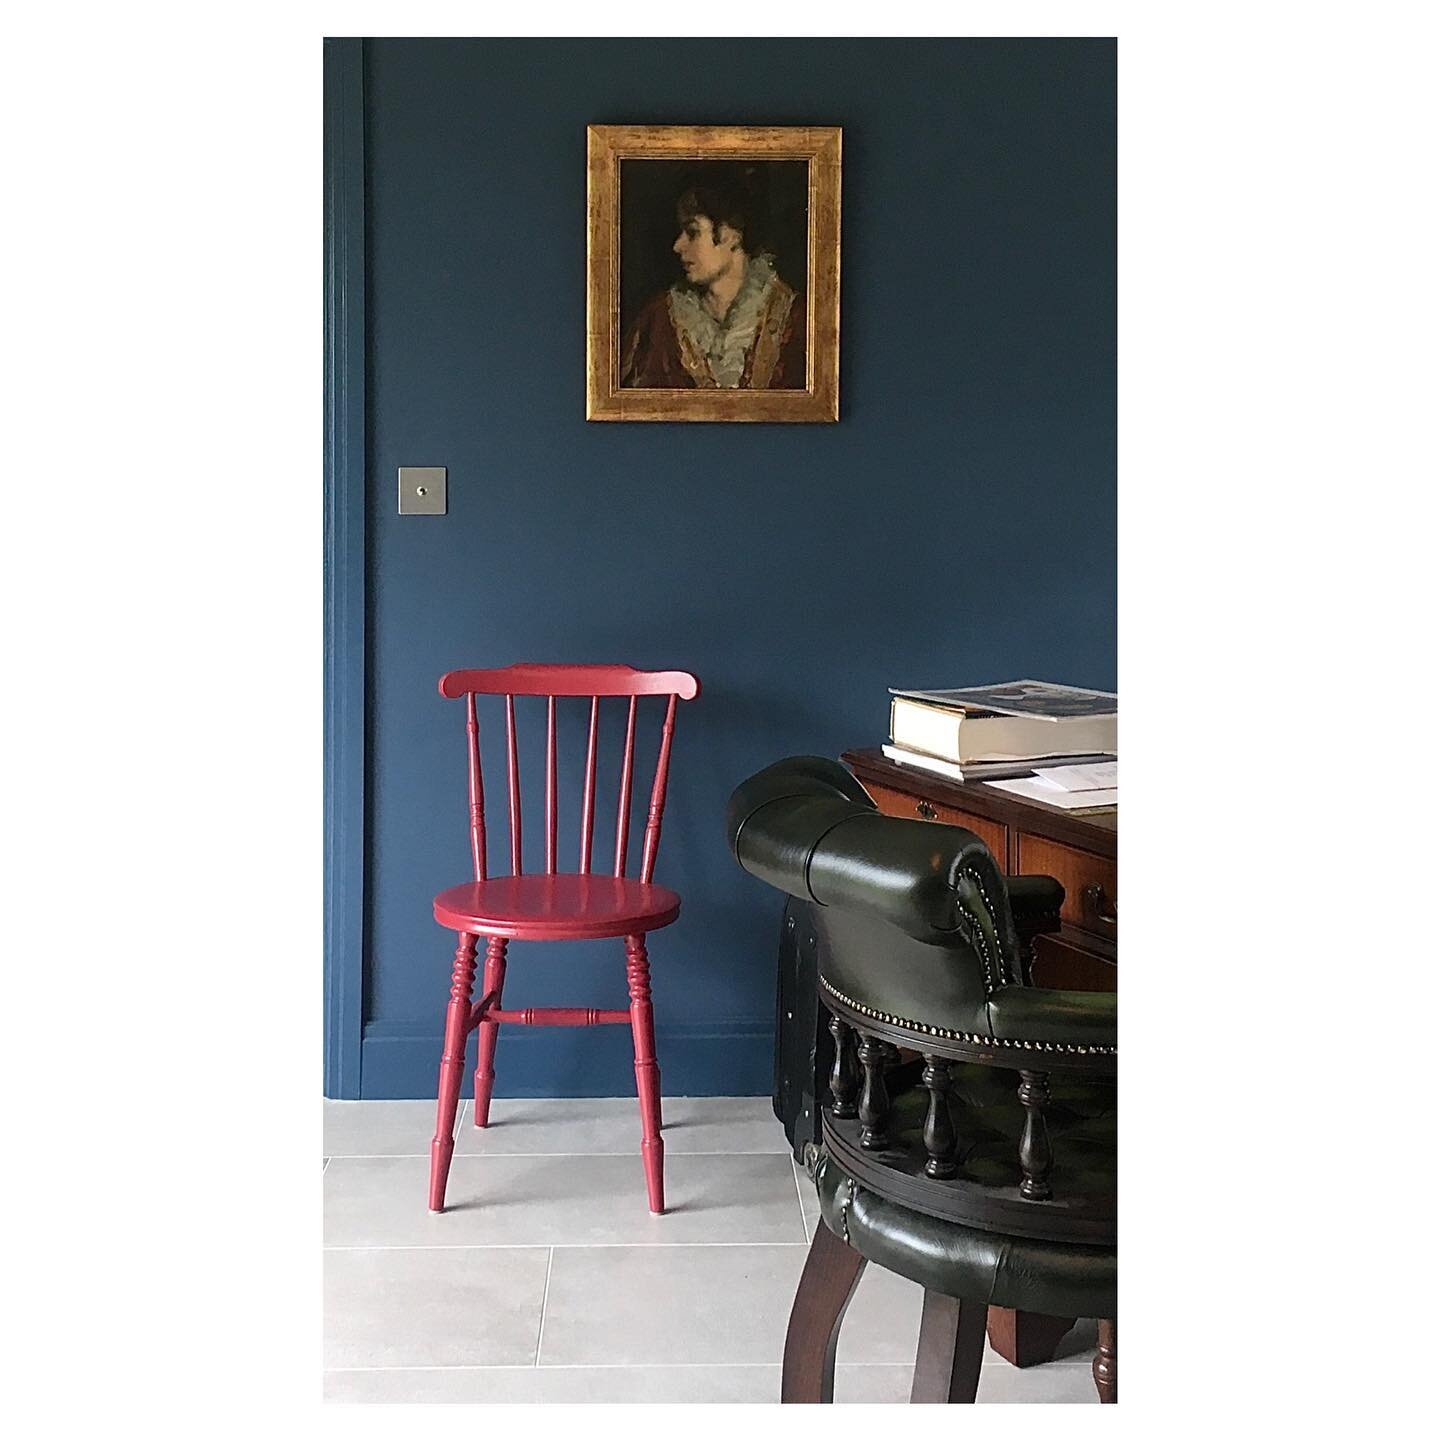 Some gorgeous pops of colour about the place at a design meeting today! Signing off designs for a large study which I can&rsquo;t wait to complete
.
.
.
.
#bespokefurniture #bespokestudy #bespokelibrary #interiordesign #countryhome #cotswolds